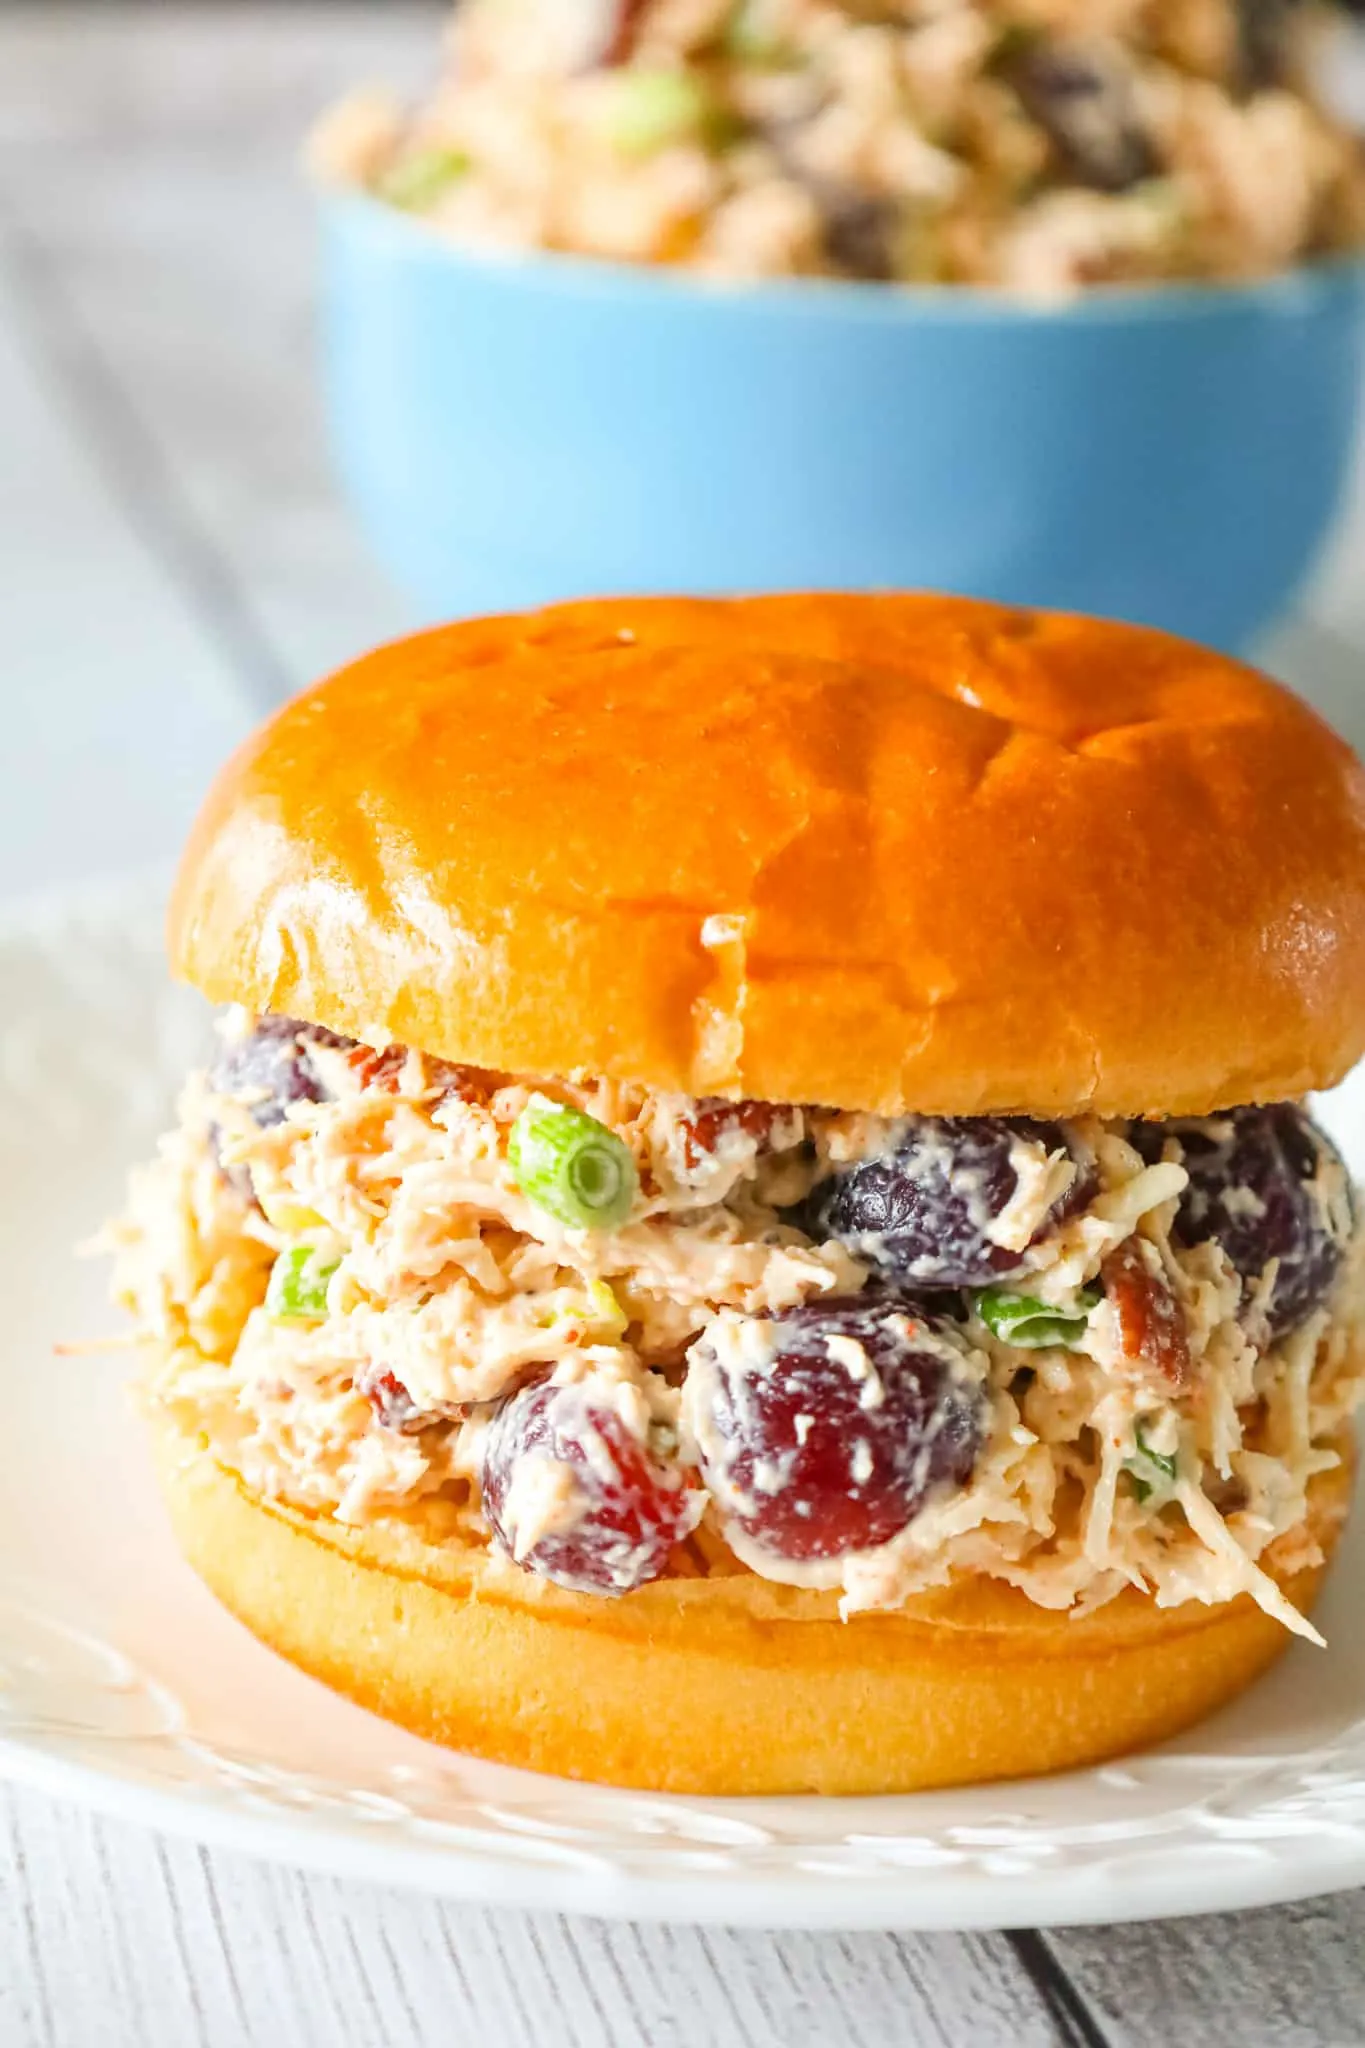 Chicken Salad with Grapes is a delicious lunch or dinner recipe using shredded rotisserie chicken and loaded with mayo, red grapes, pecans, chopped green onion and shredded mozzarella cheese.